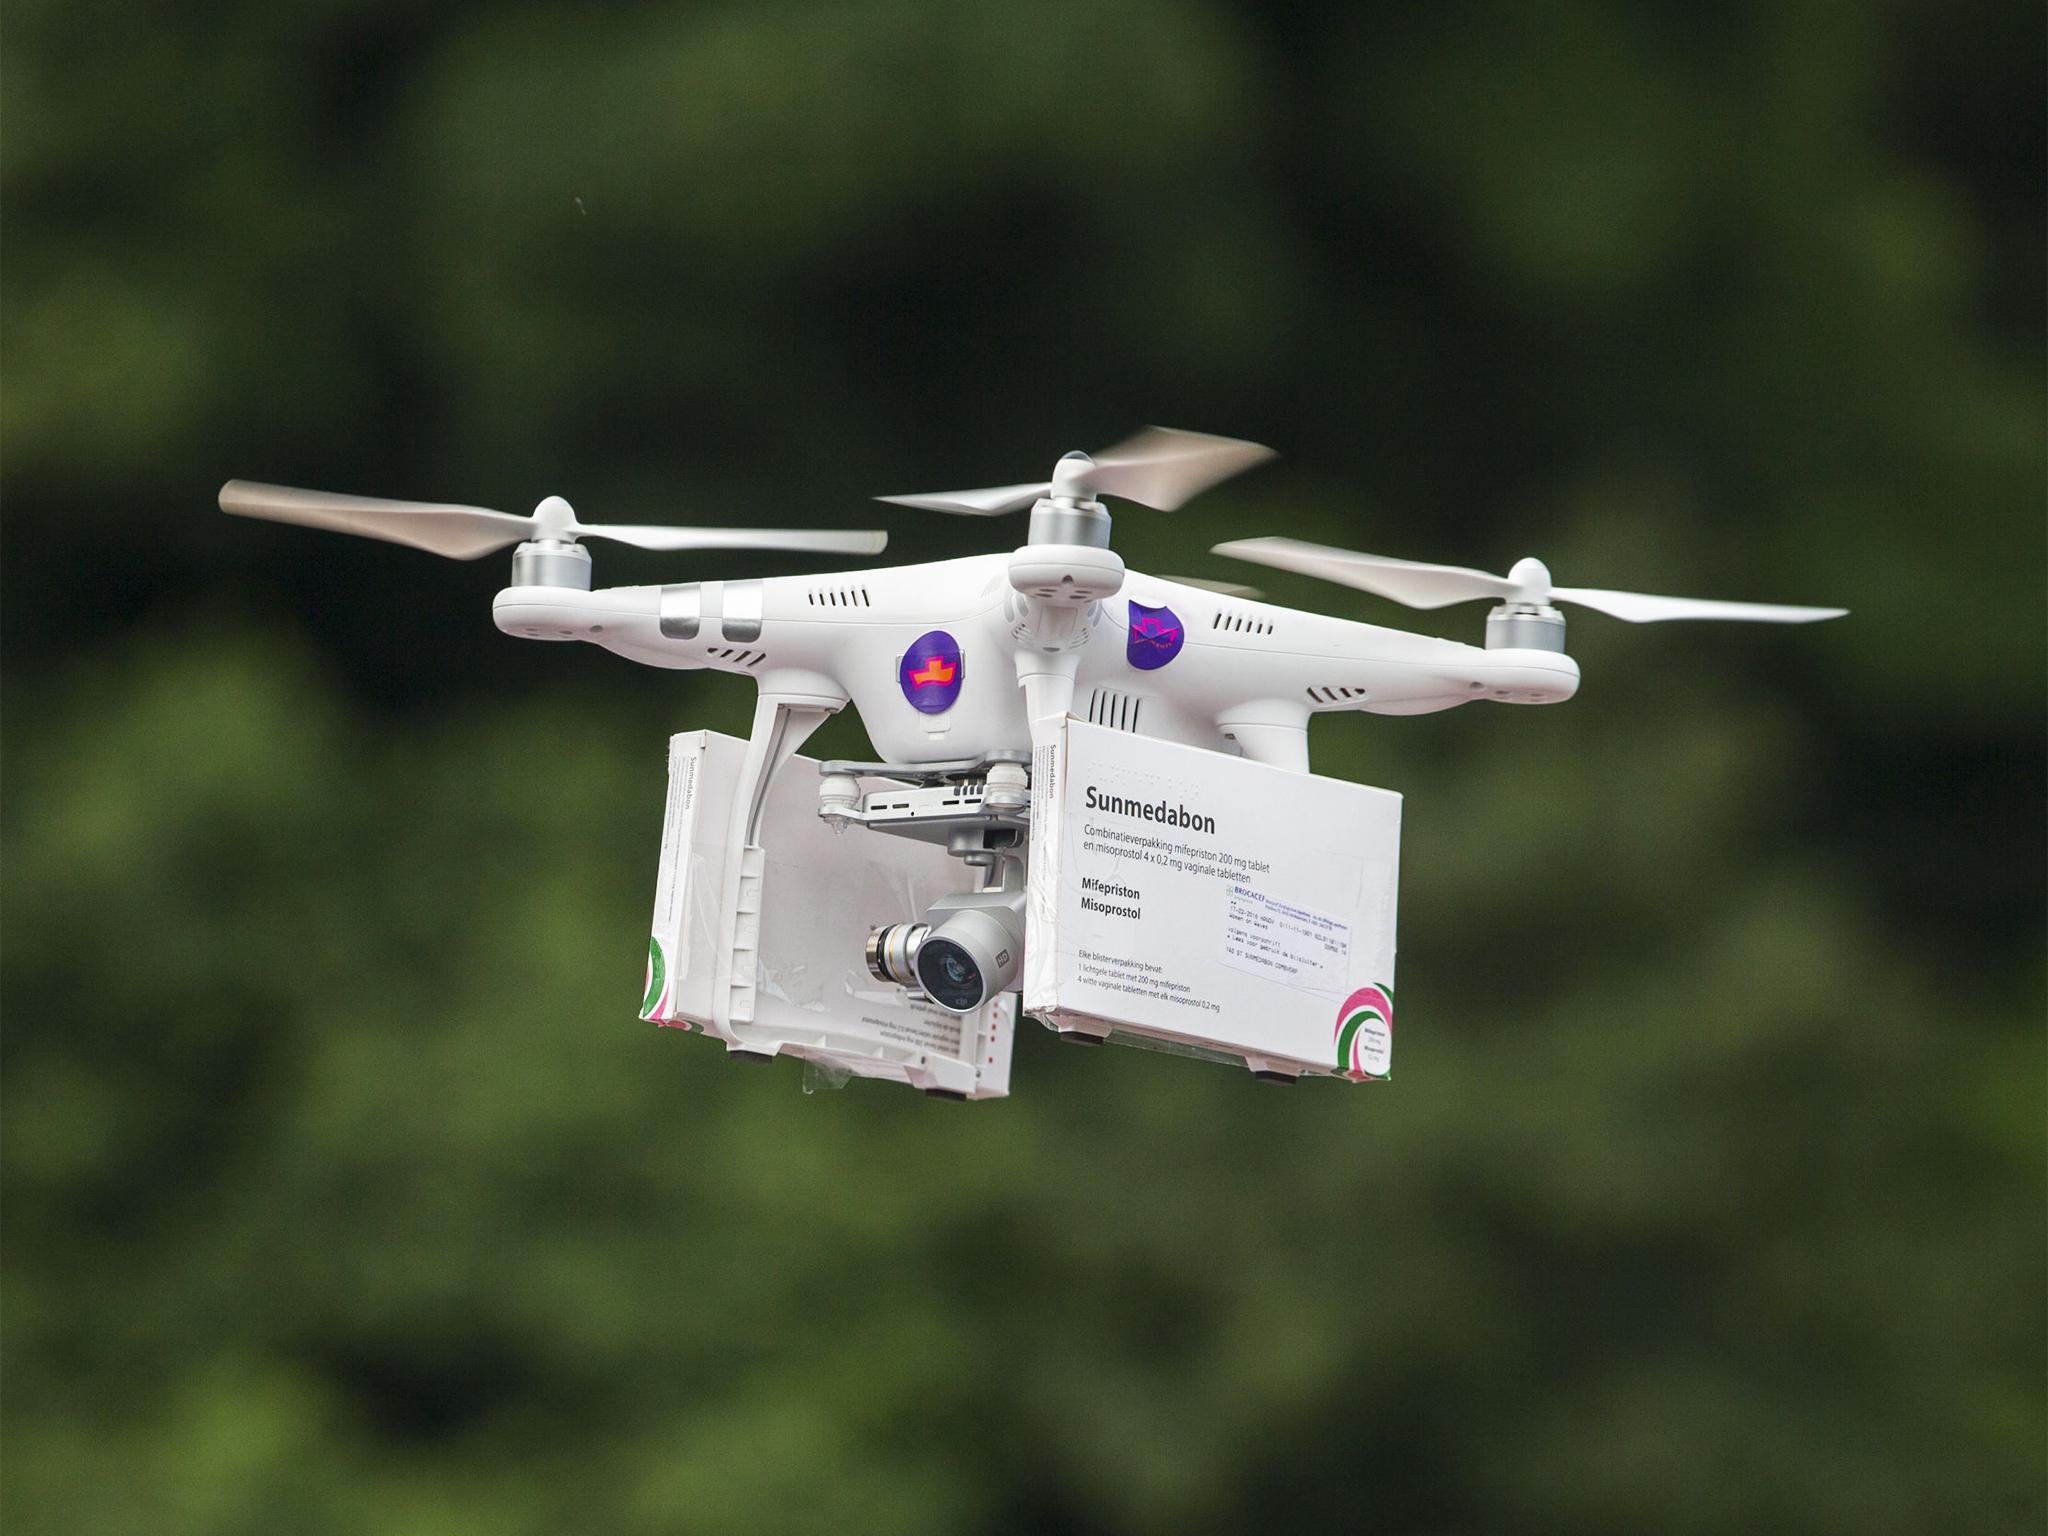 Pro-choice activists used a drone to deliver abortion pills to women in Northern Ireland